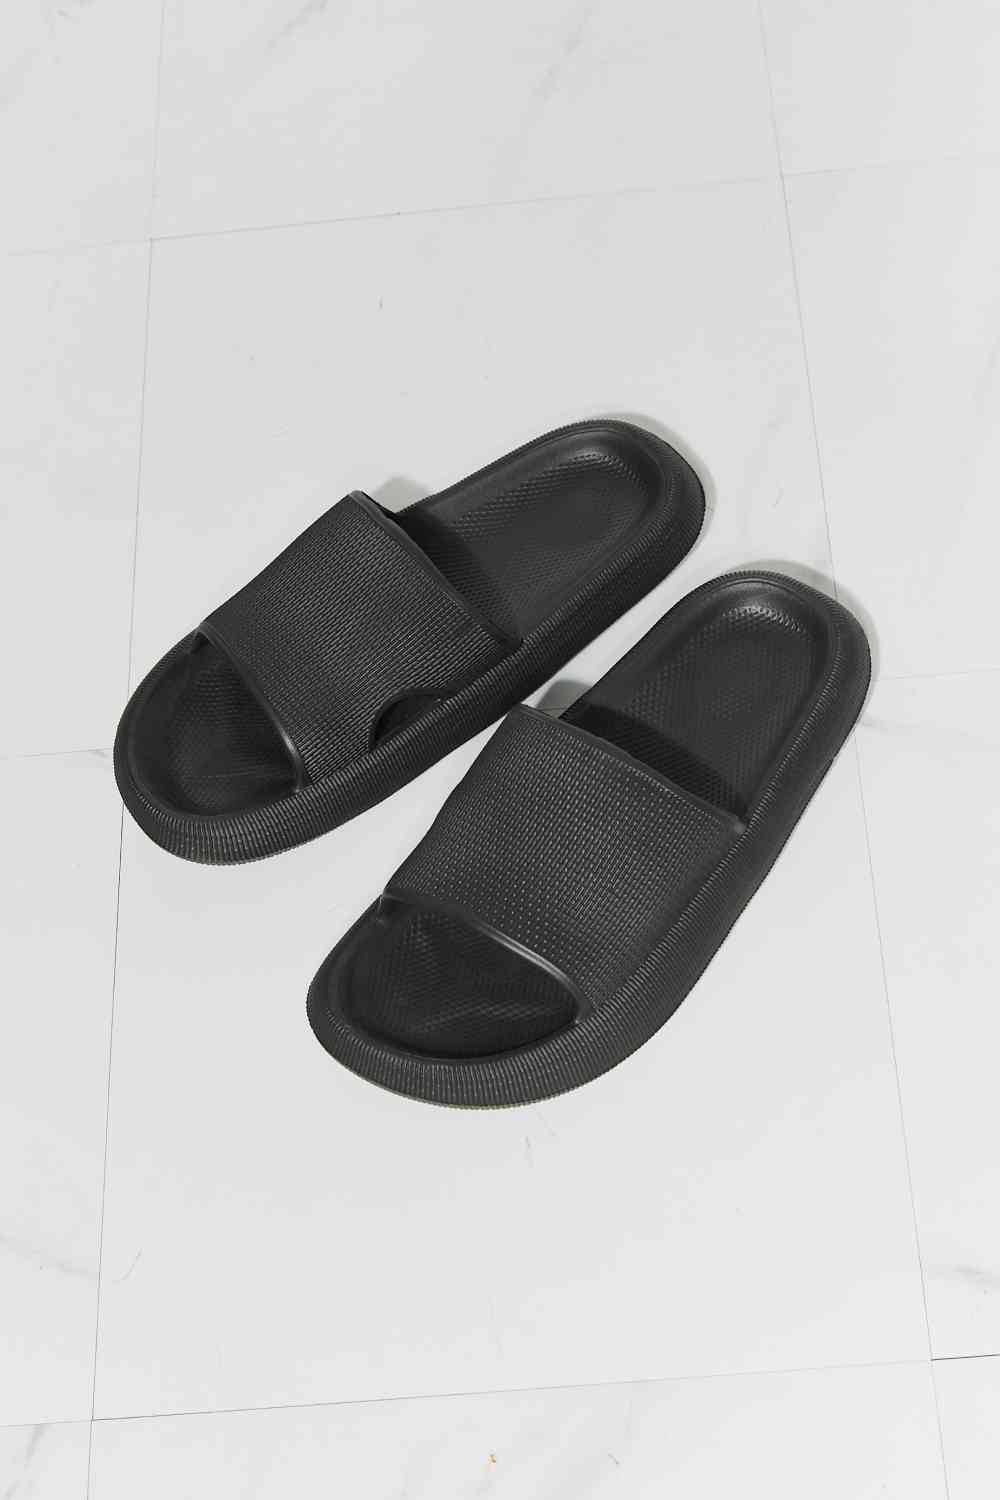 MMShoes Arms Around Me Open Toe Slide in Black - Rose Gold Co. Shop